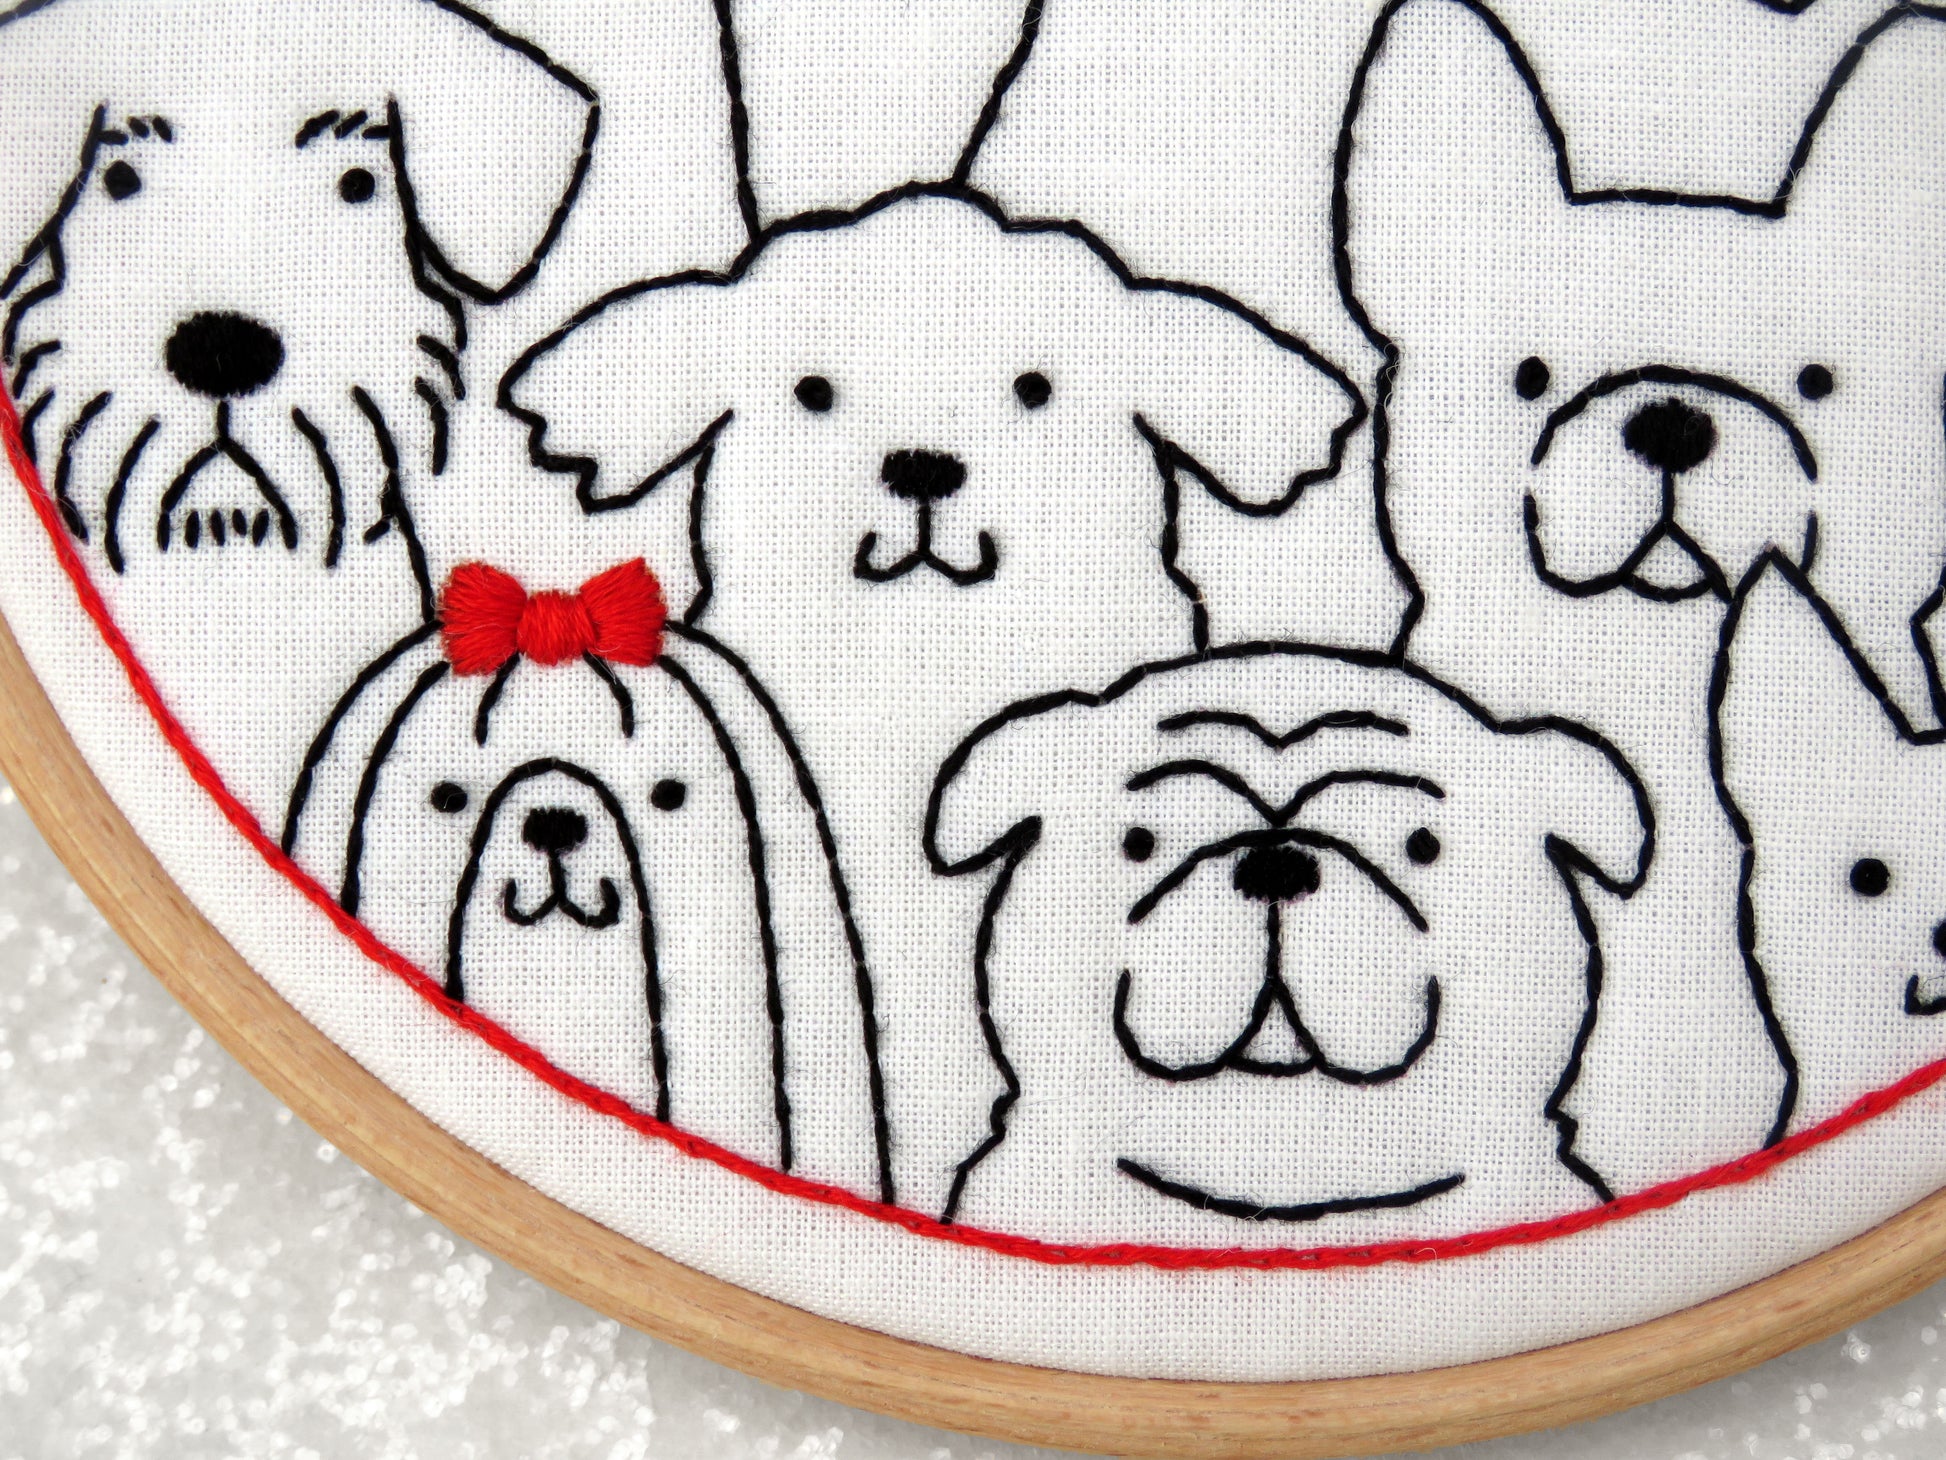 Dogs Embroidery Kit - Embroidery Kits - ohsewbootiful